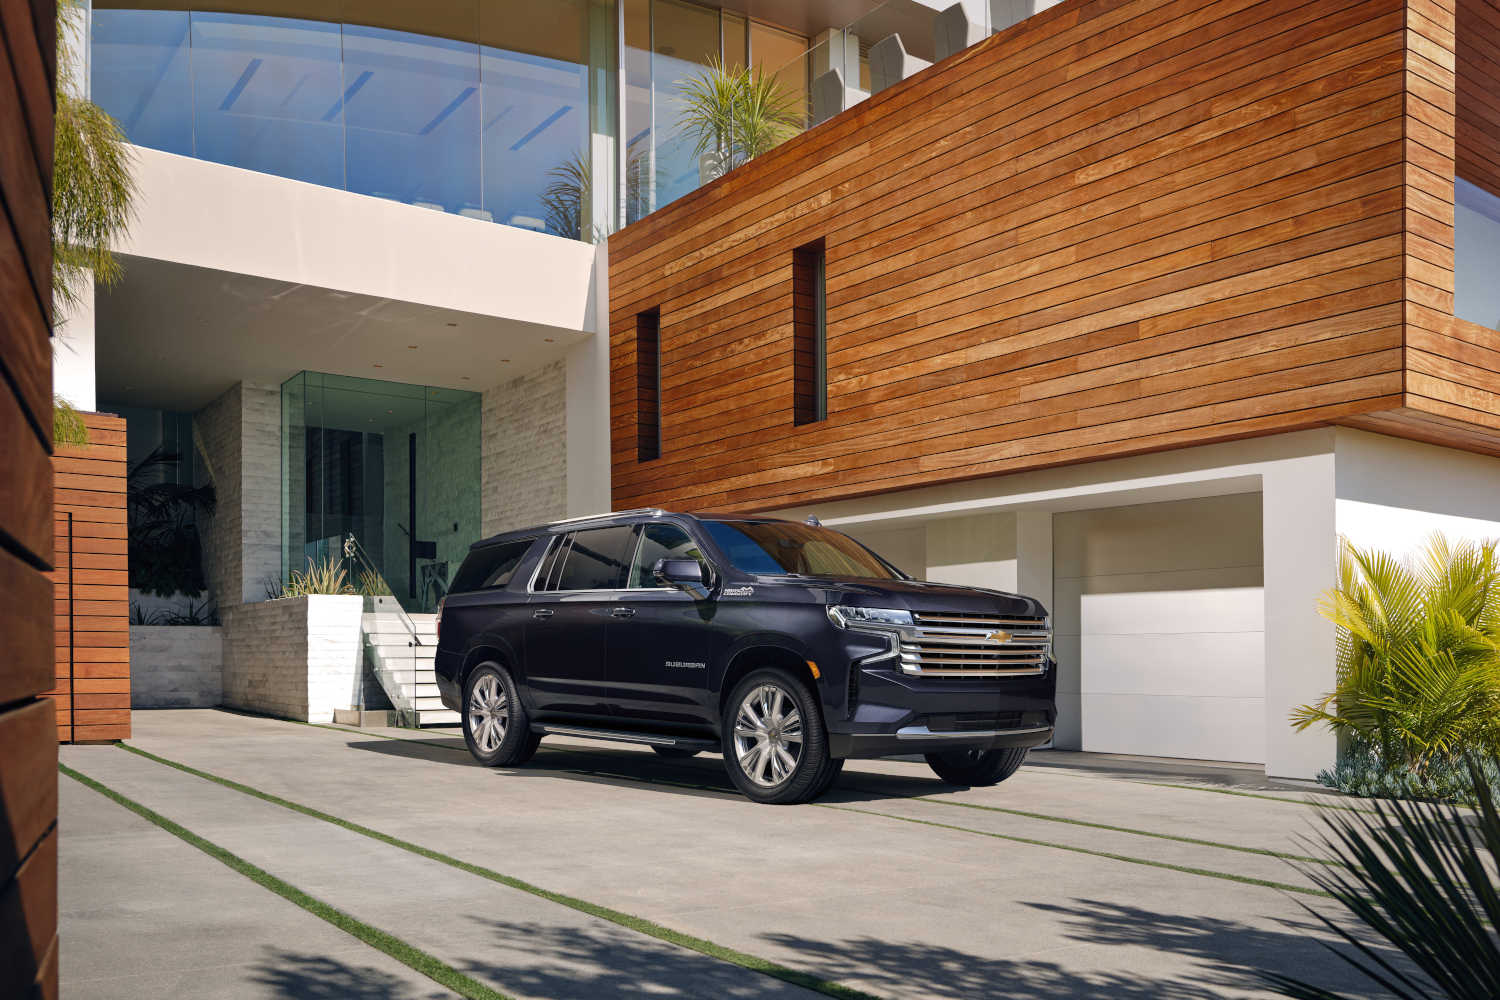 The best large SUV for families is this 2023 Chevrolet Suburban